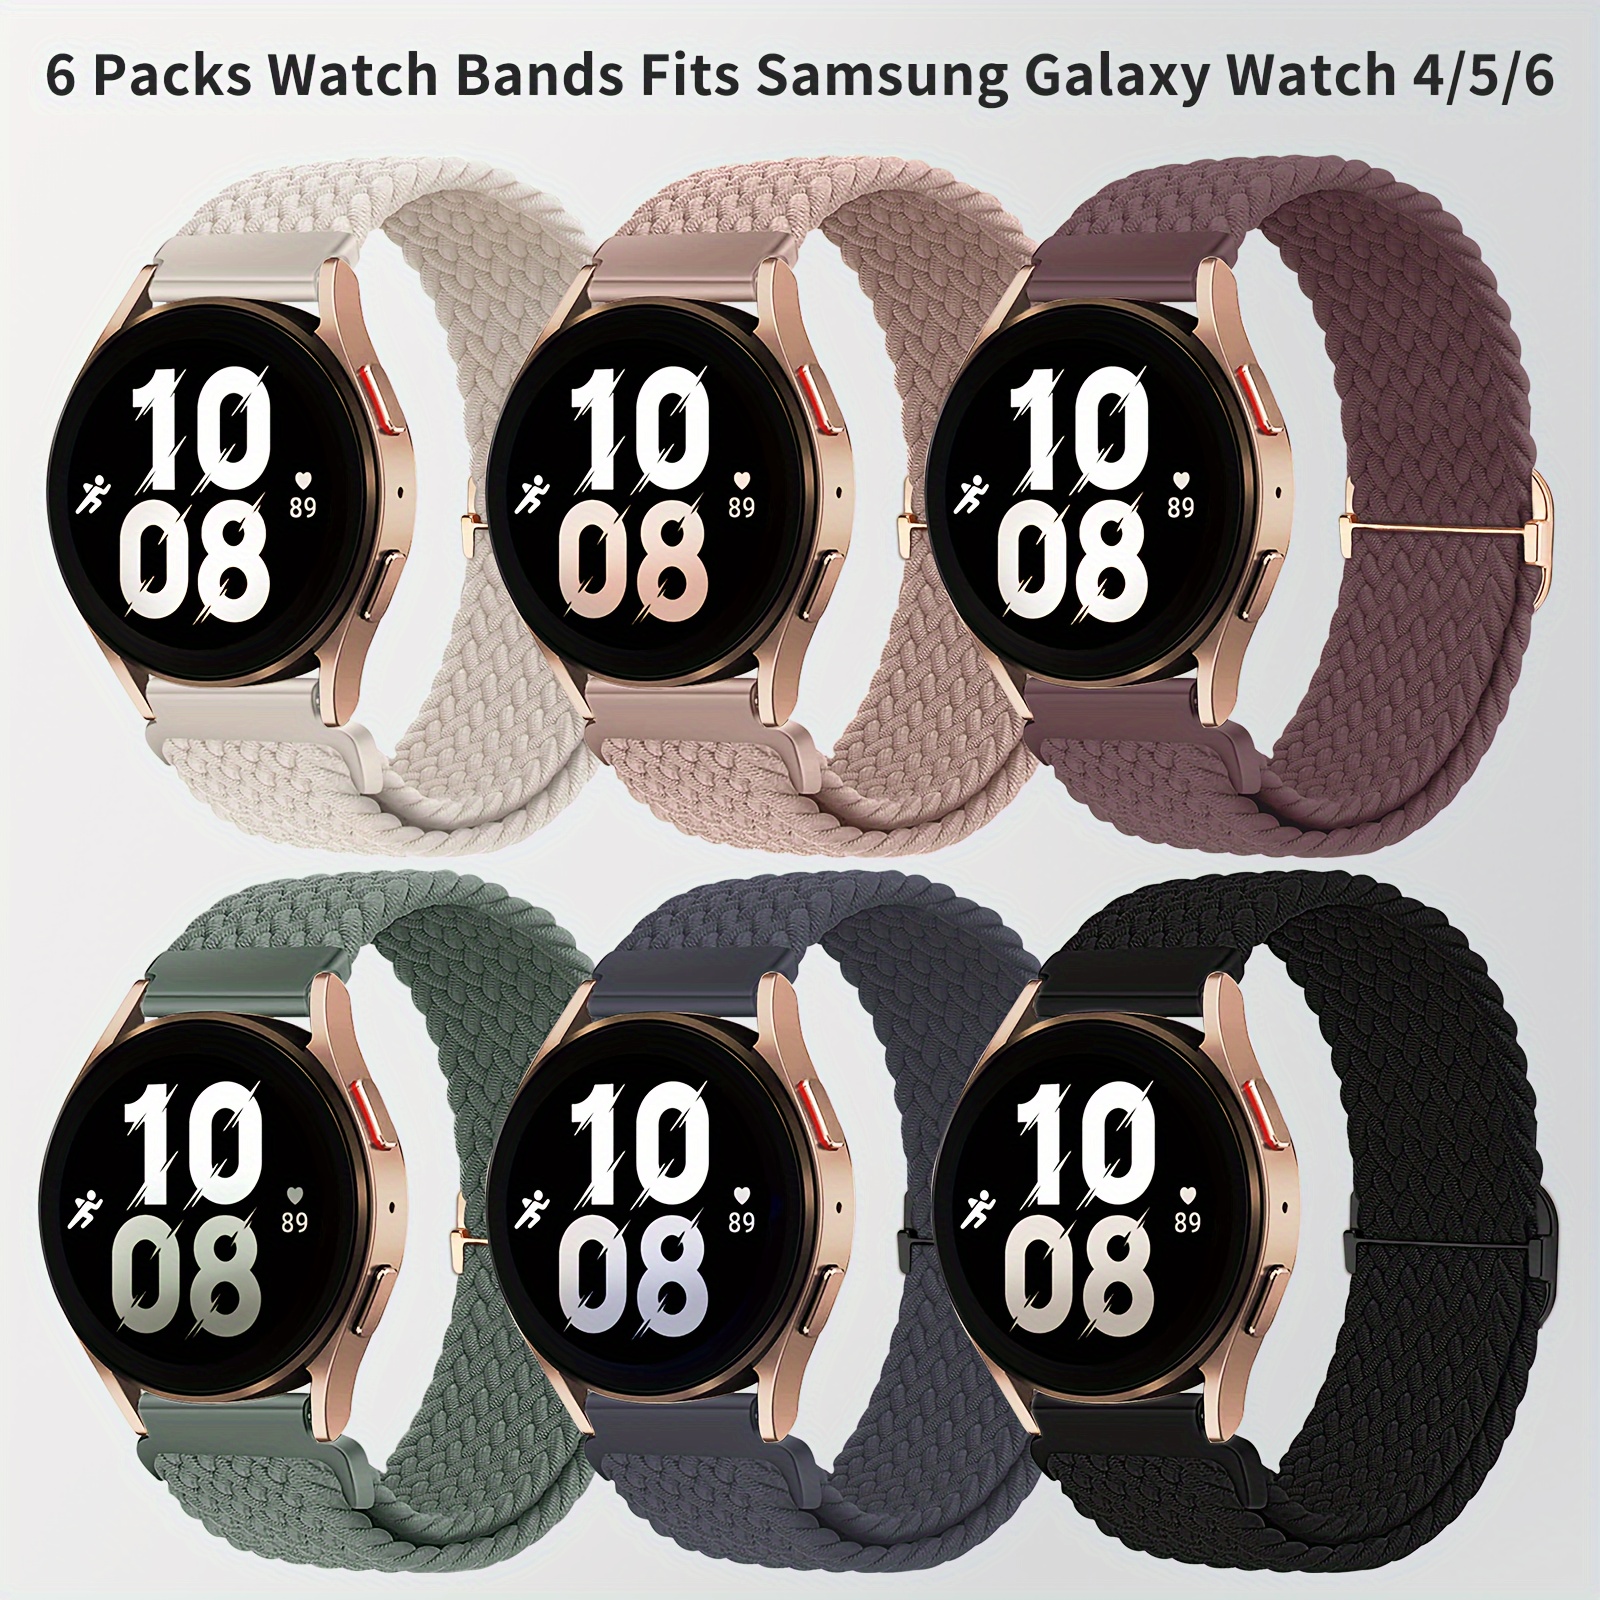 

6 Packs Watch Bands, Compatible With Samsung Galaxy Watch Active 2 Bands 40mm 44mm/active 40mm/watch 3 41mm/galaxy Watch 42mm/gear S2/watch 4/5/6 Fabric 20mm Wristband